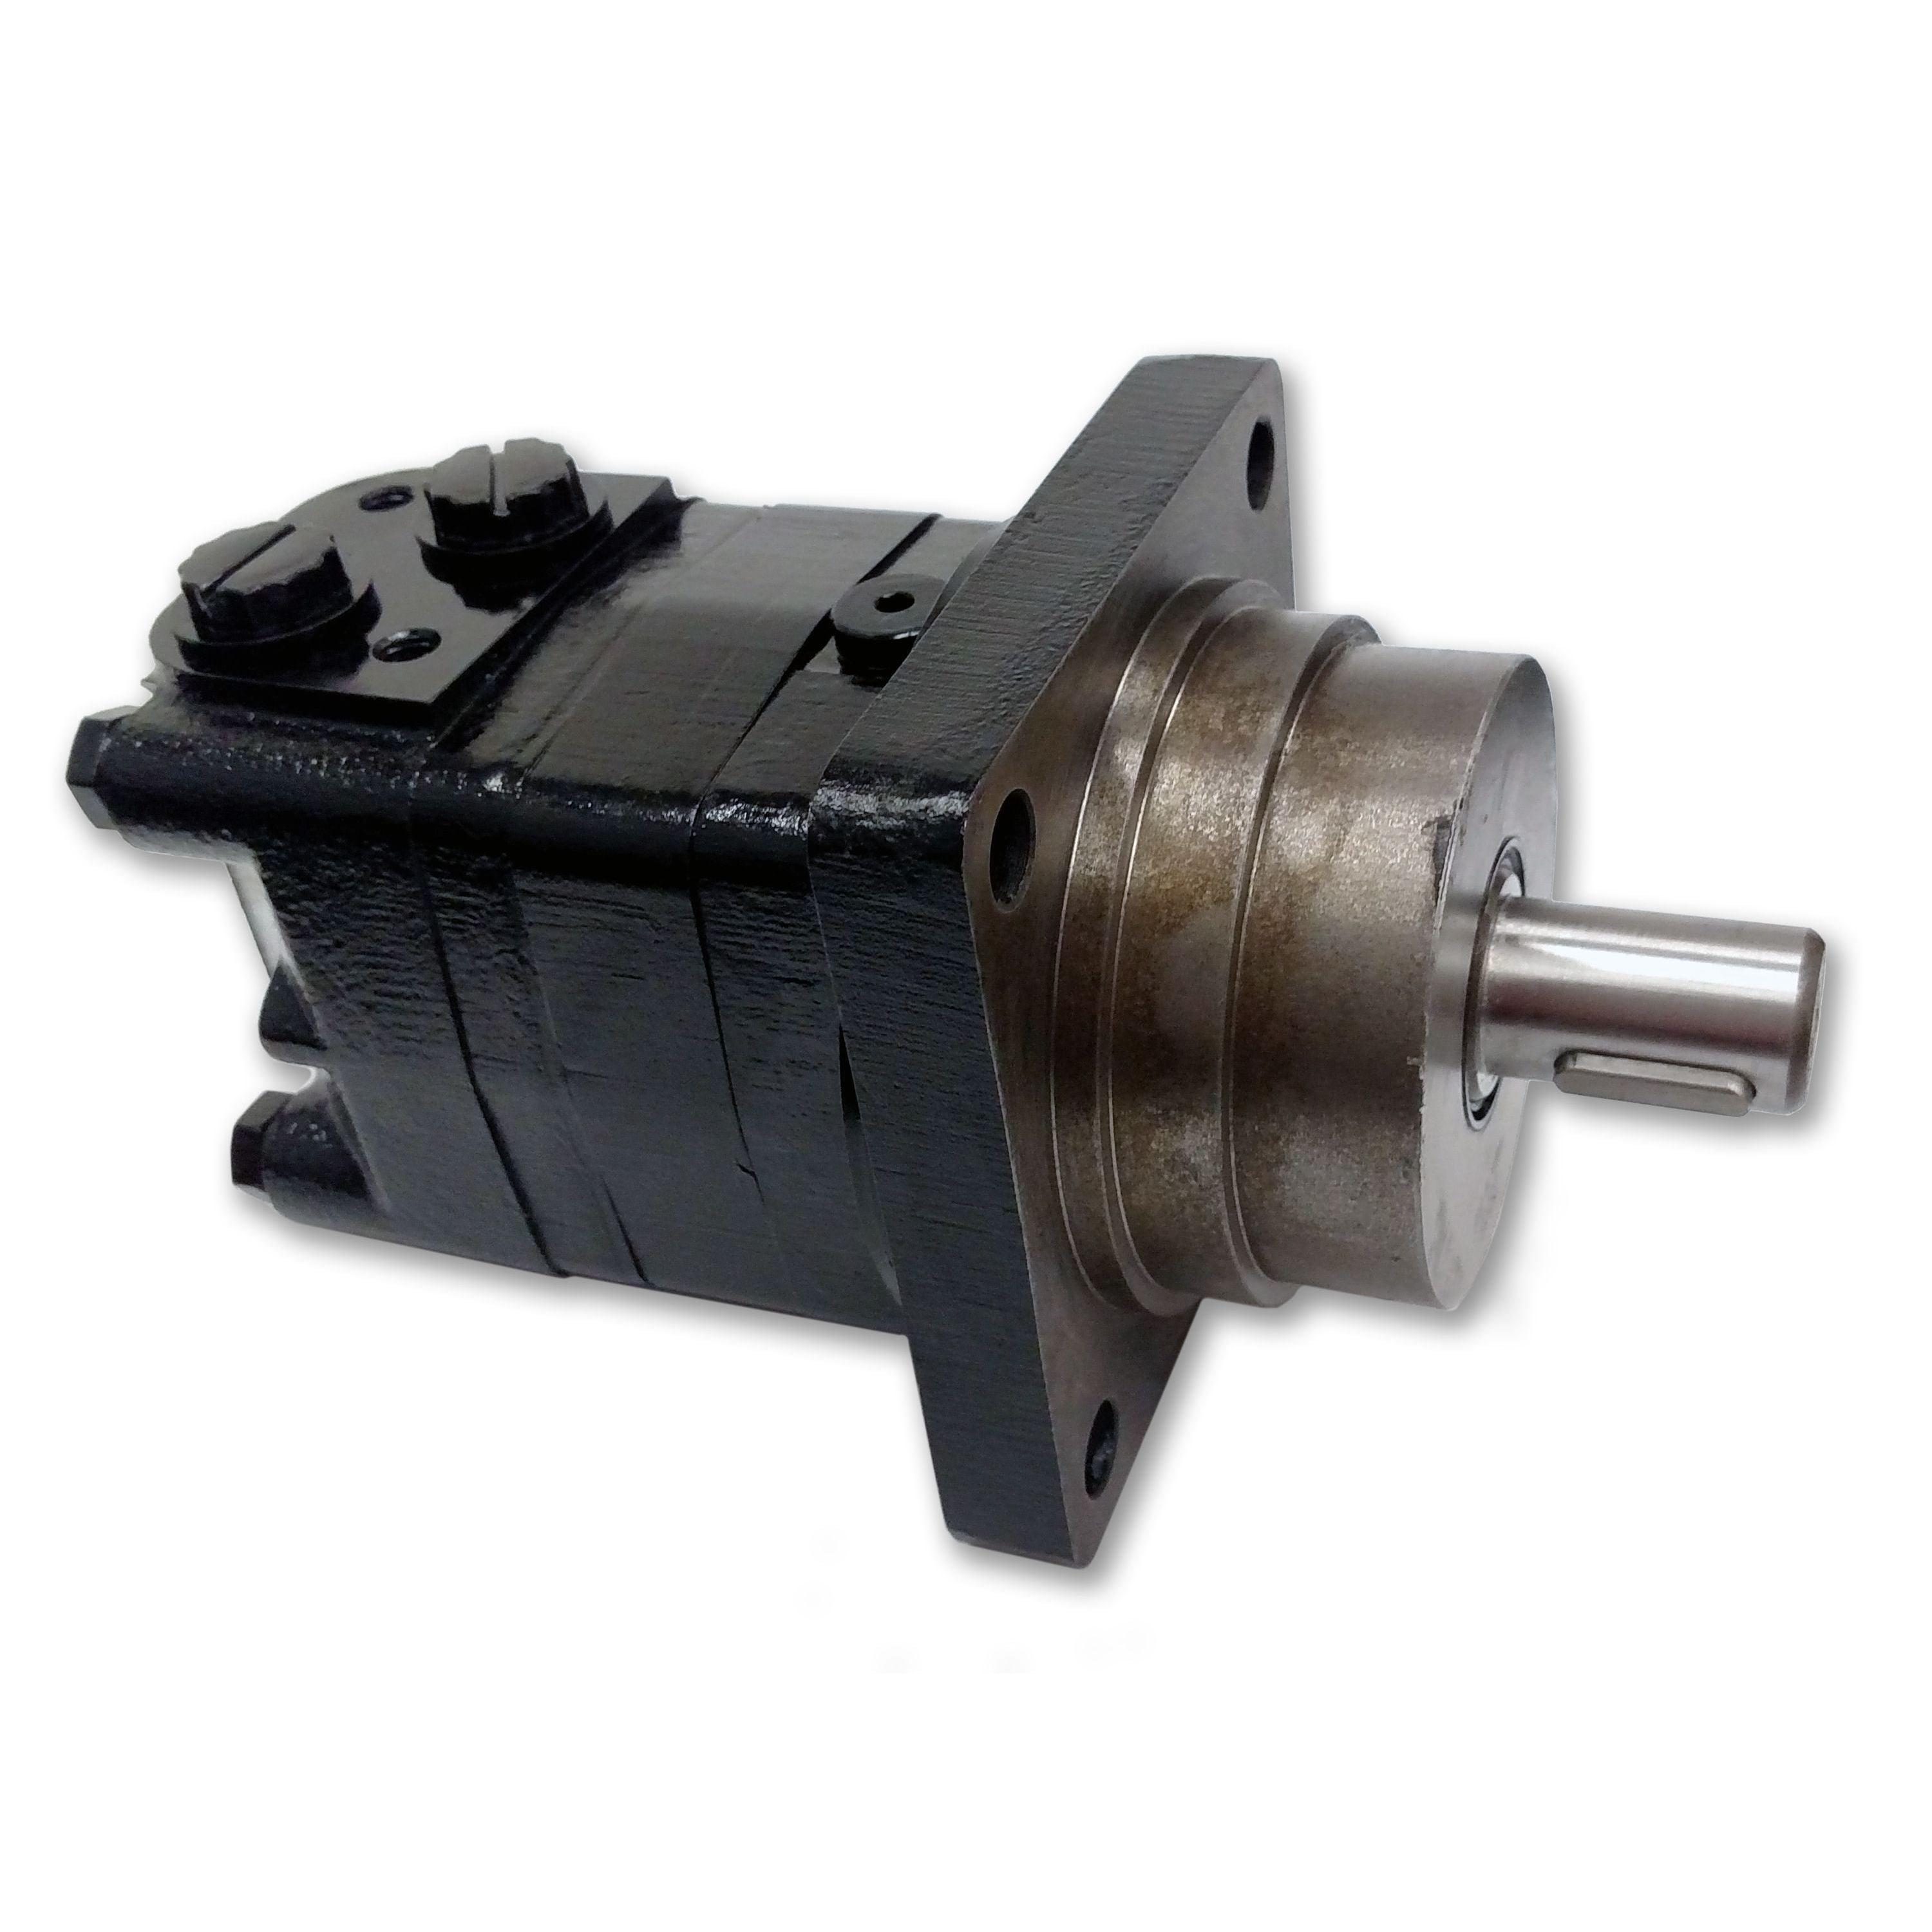 BMSY-250-WE-G-S : Dynamic LSHT Motor, 243cc, 300RPM, 6265in-lb, 2900psi Differential, 19.81GPM, Wheel Mount, 1.25" Bore x 5/16" Key Shaft, Side Ported, #10 SAE (5/8")